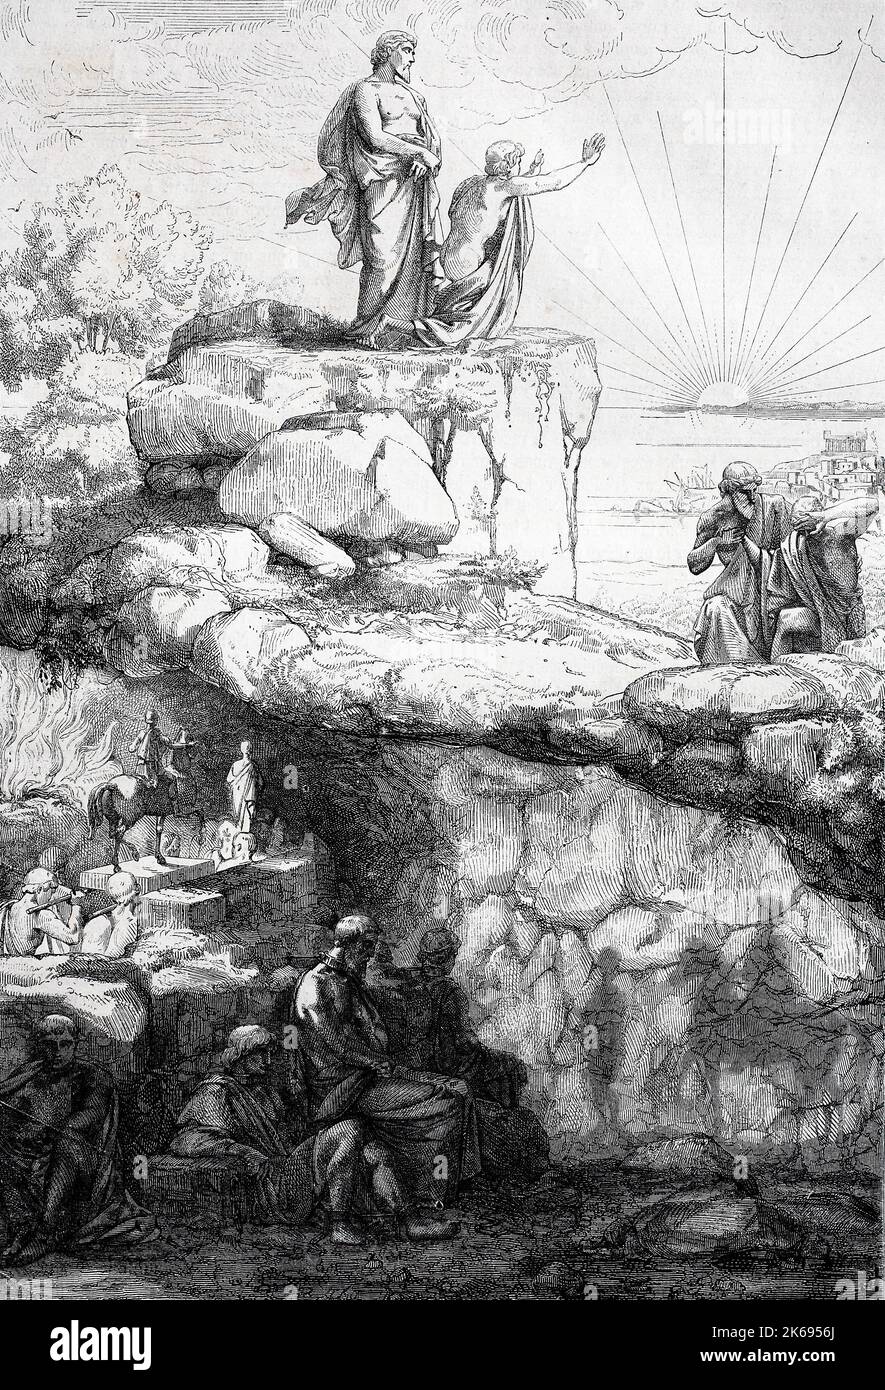 Digital improved reproduction, Plato's cave, allegory of Plato's allegory of the cave, ancient philosophy, original woodprint from th 19th century Stock Photo